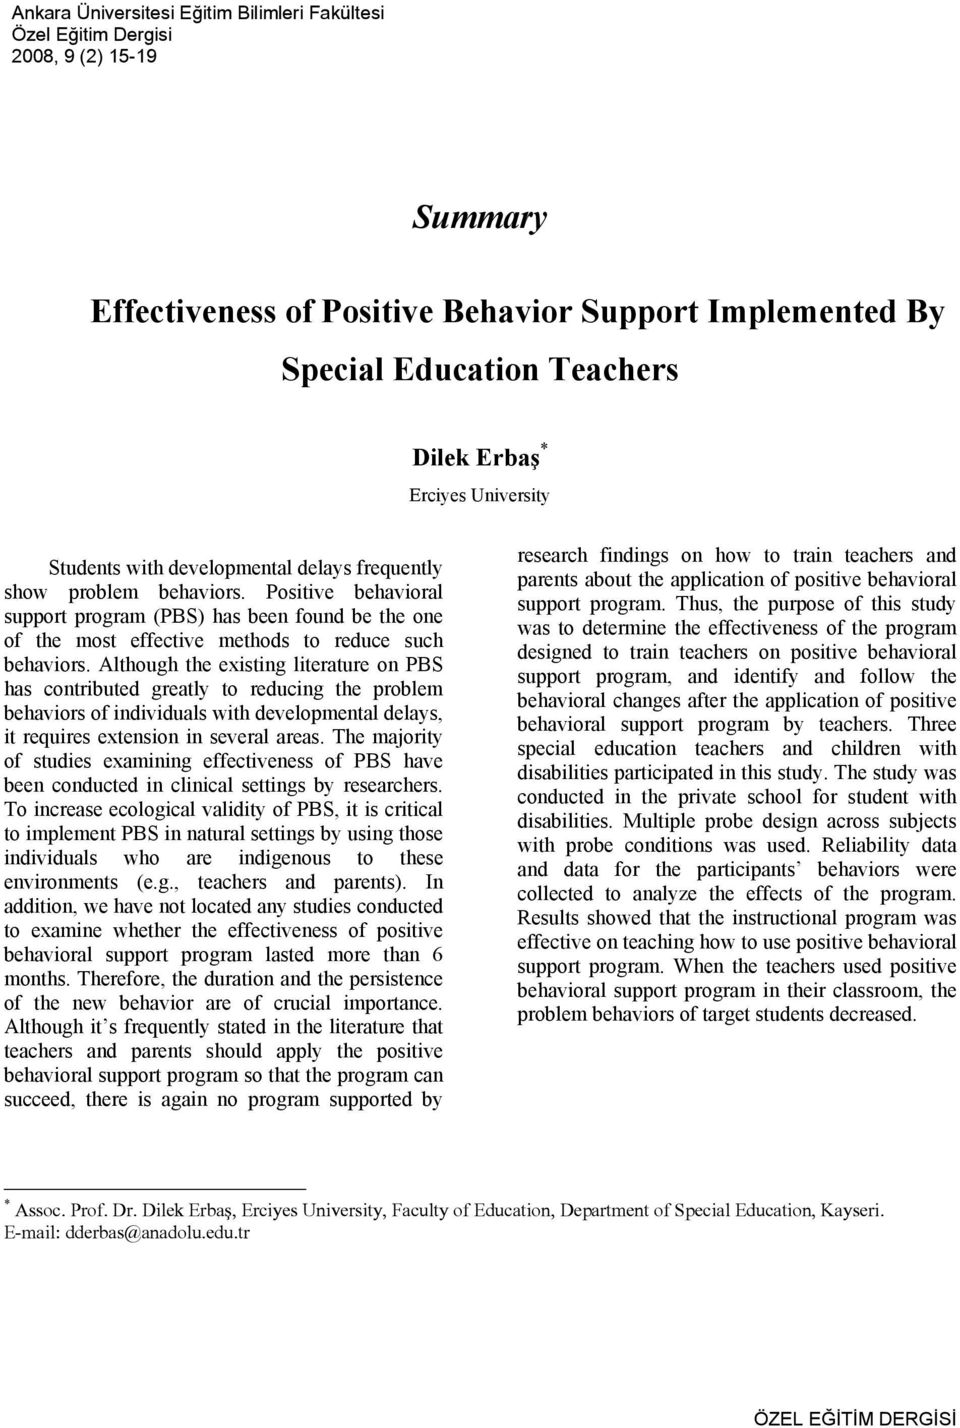 Positive behavioral support program (PBS) has been found be the one of the most effective methods to reduce such behaviors.